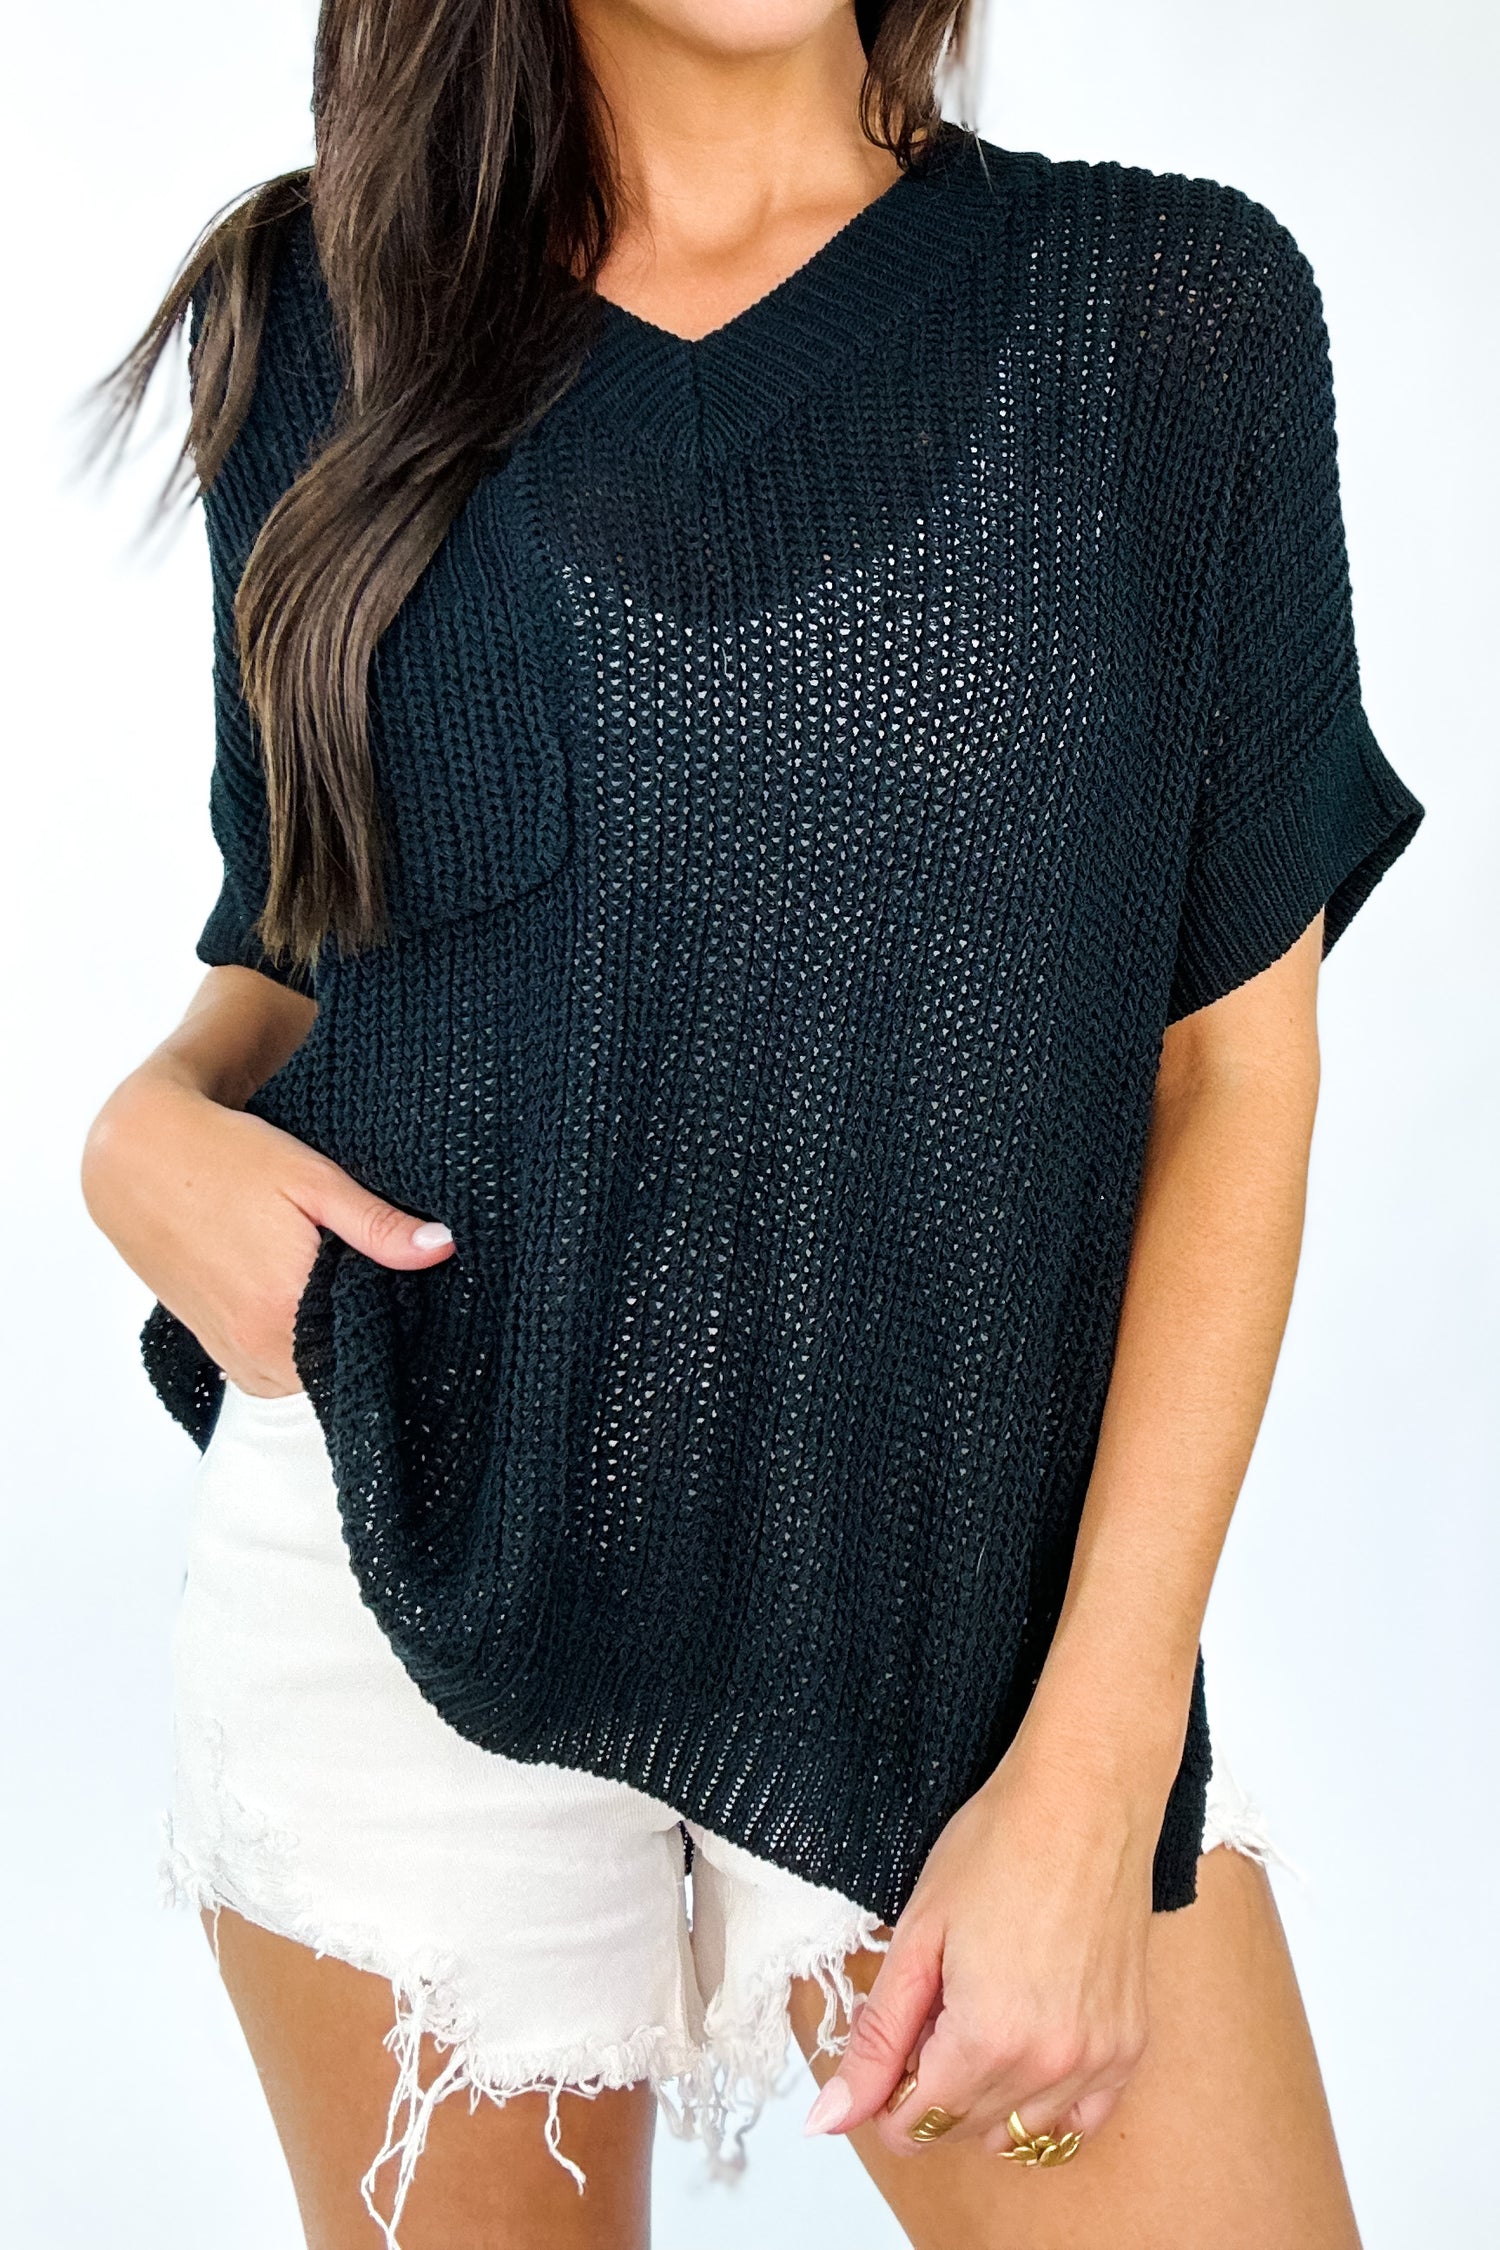 FOR KEEPS SWEATER KNIT SHORT SLEEVE TOP IN BLACK